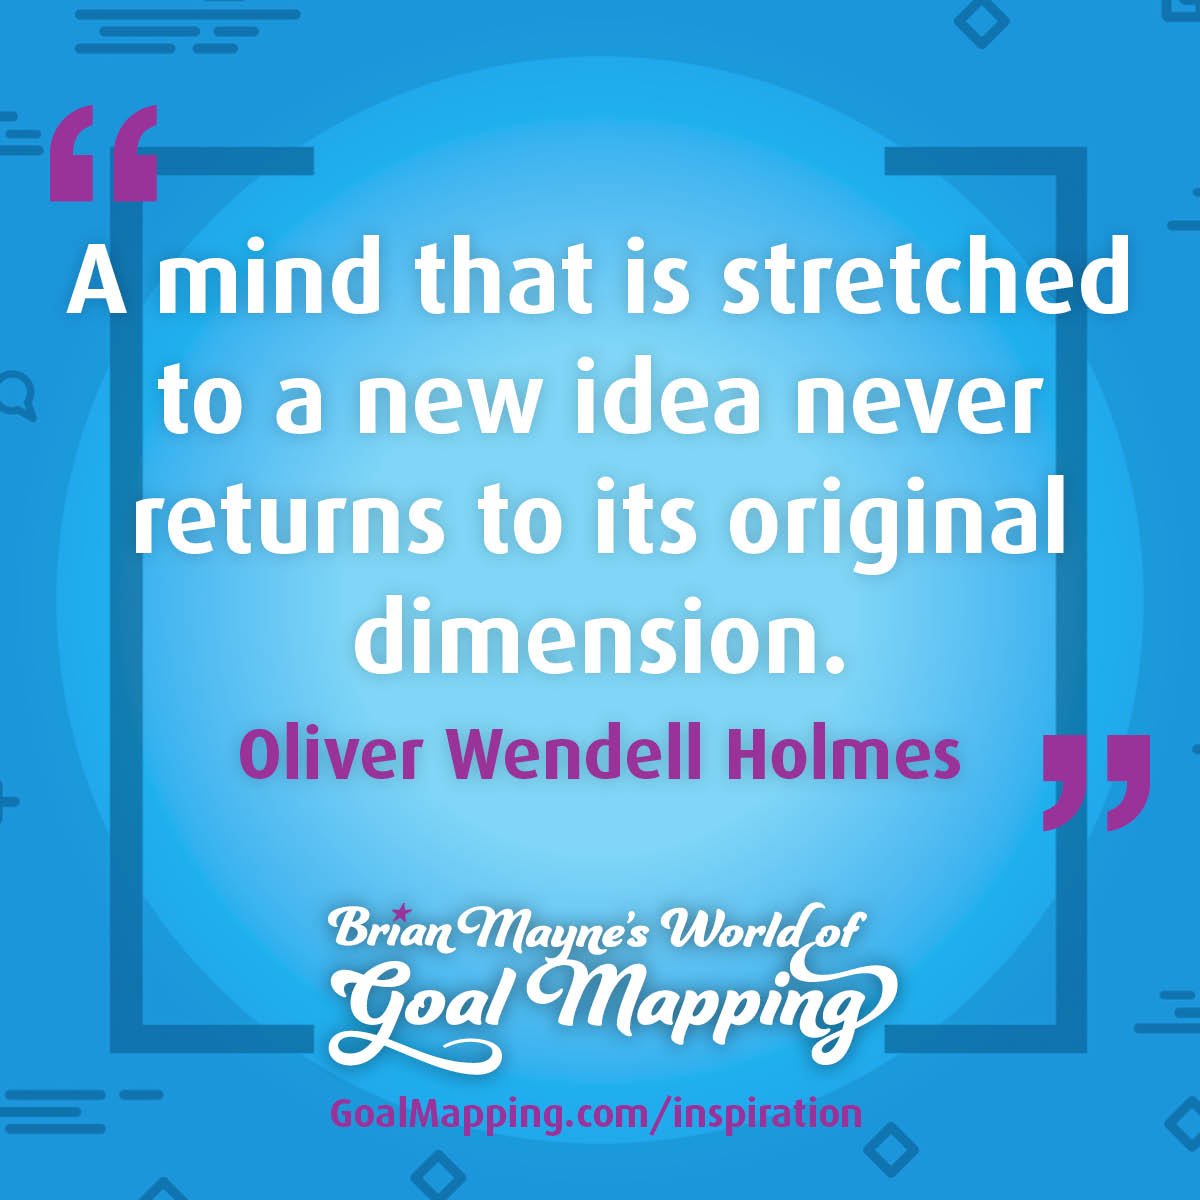 "A mind that is stretched to a new idea never returns to its original dimension." Oliver Wendell Holmes